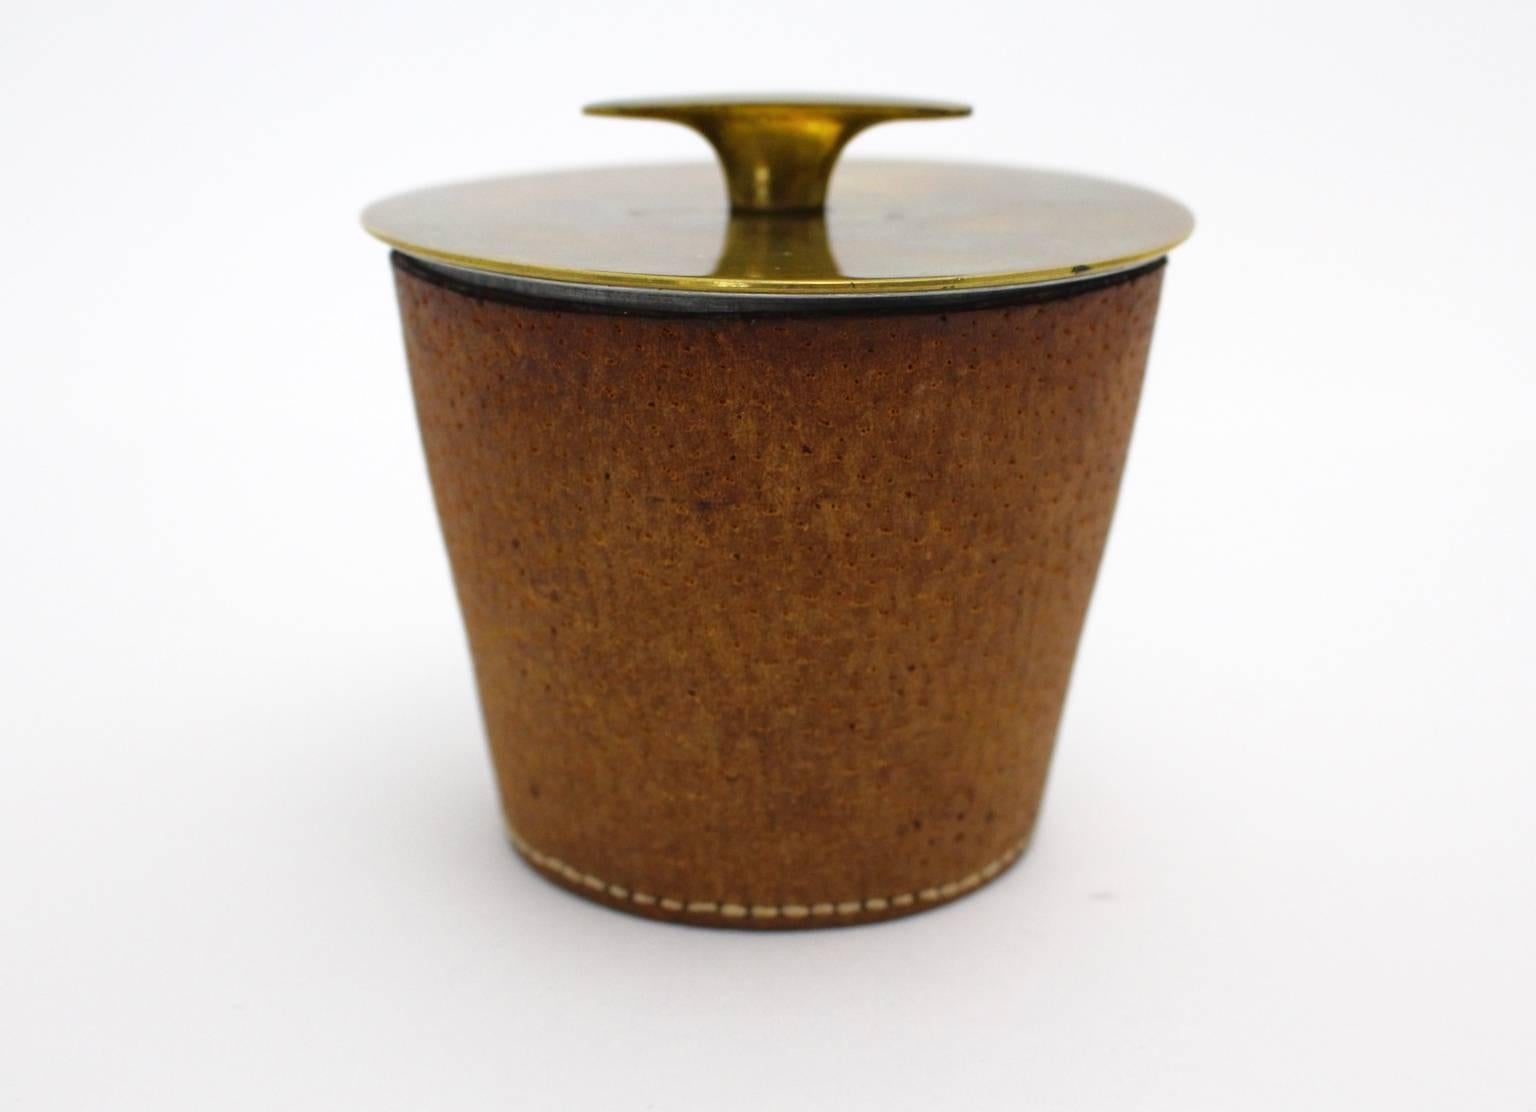 Leather covered aluminium box with patinated brass top by Carl Auböck, Vienna. This vintage leather box is also a great desk accessories.
Very good vintage condition with wonderful patina.
All measures are approximate.